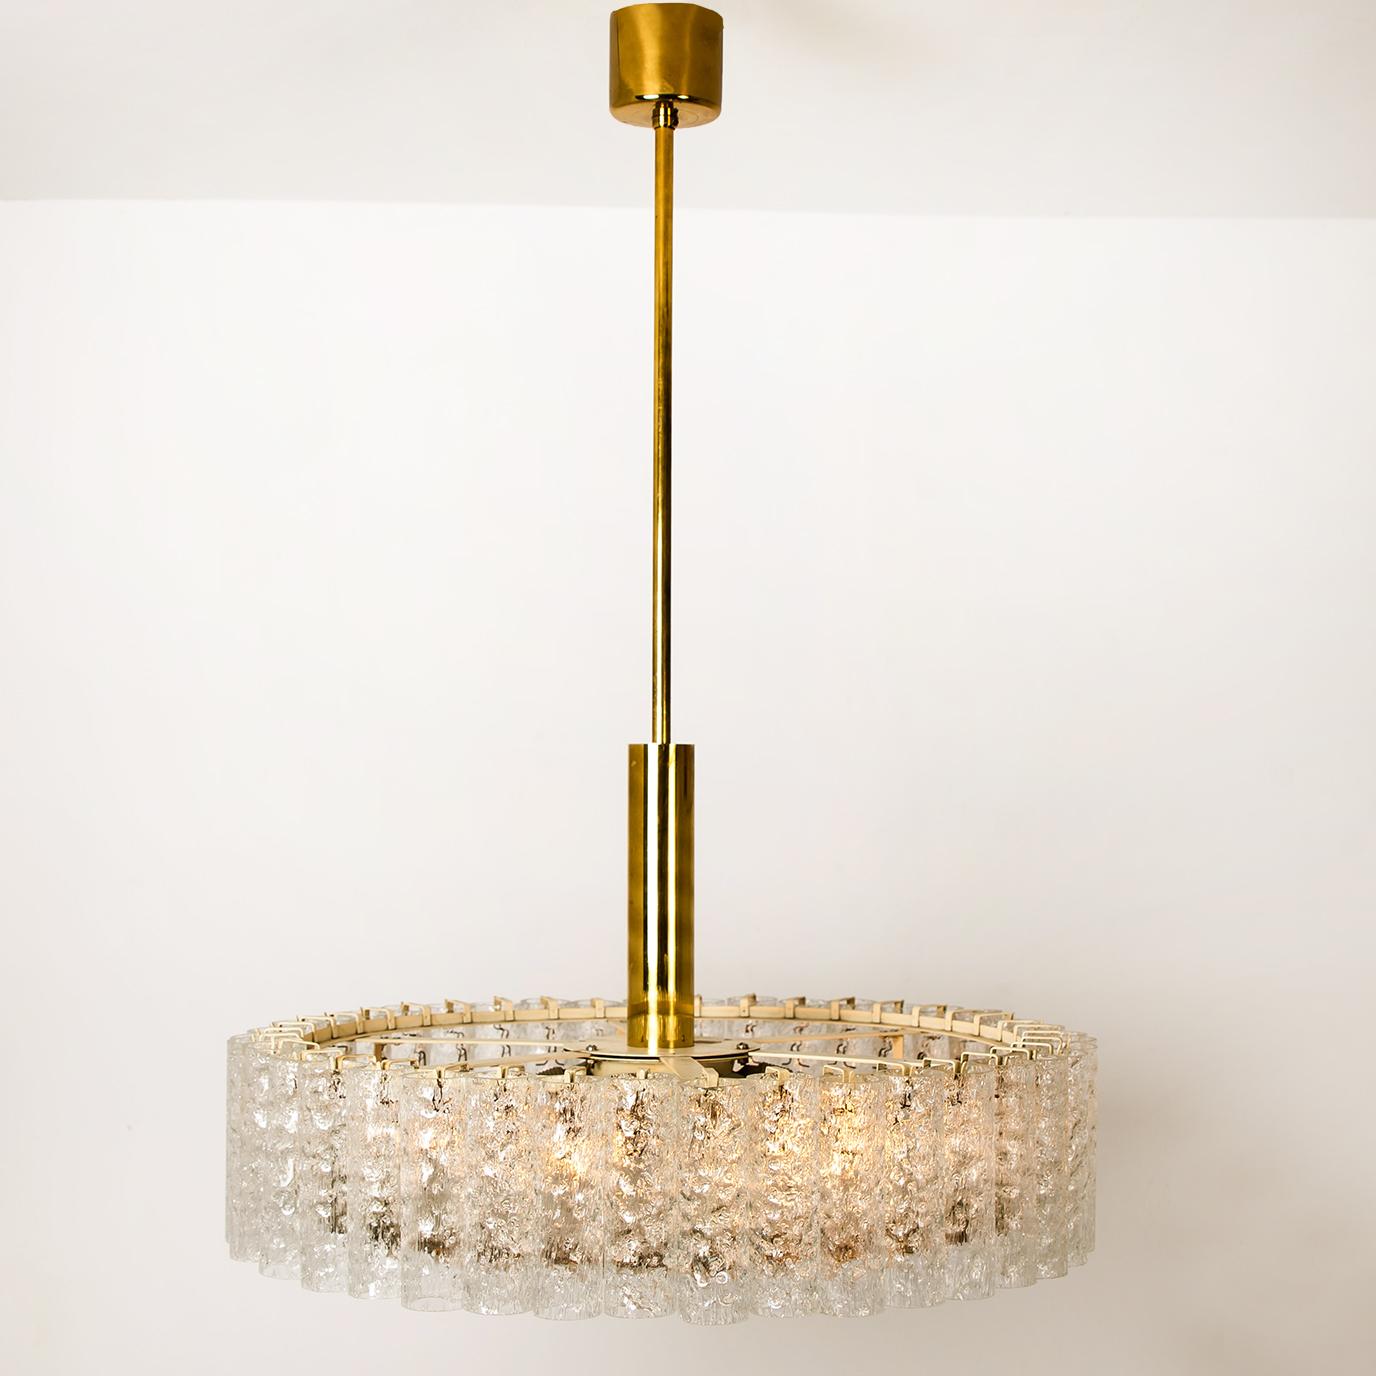 20th Century Pair of Large Glass Brass Light Fixtures by Doria, Germany, 1969